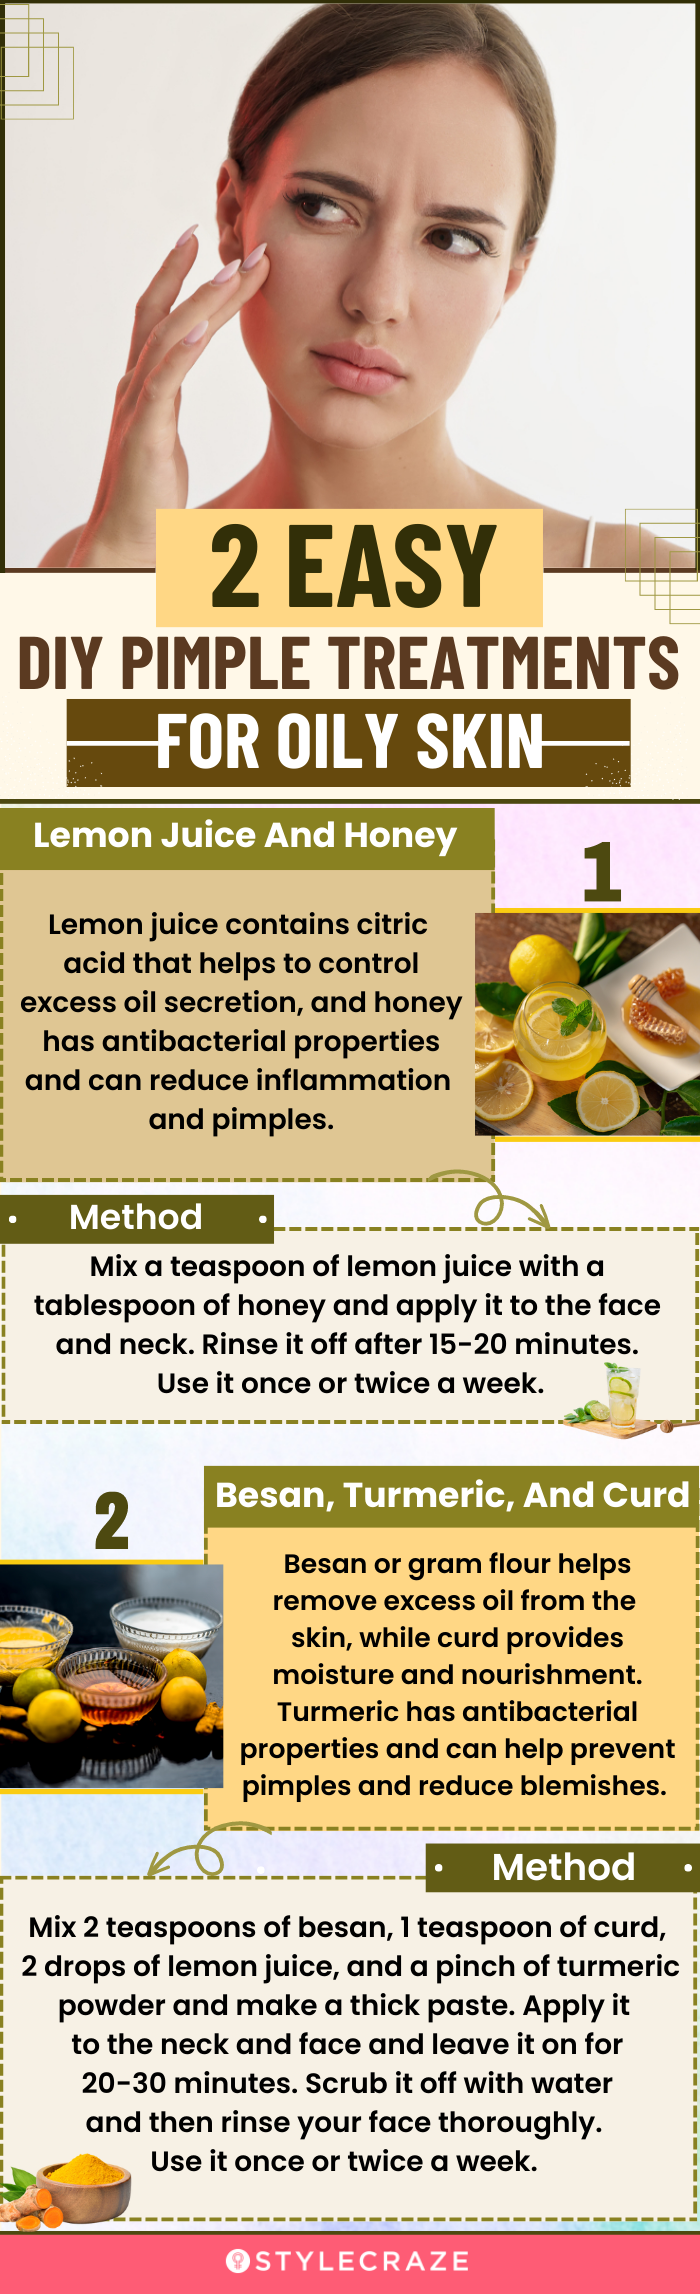 2 easy diy pimple treatments for oily skin (infographic)